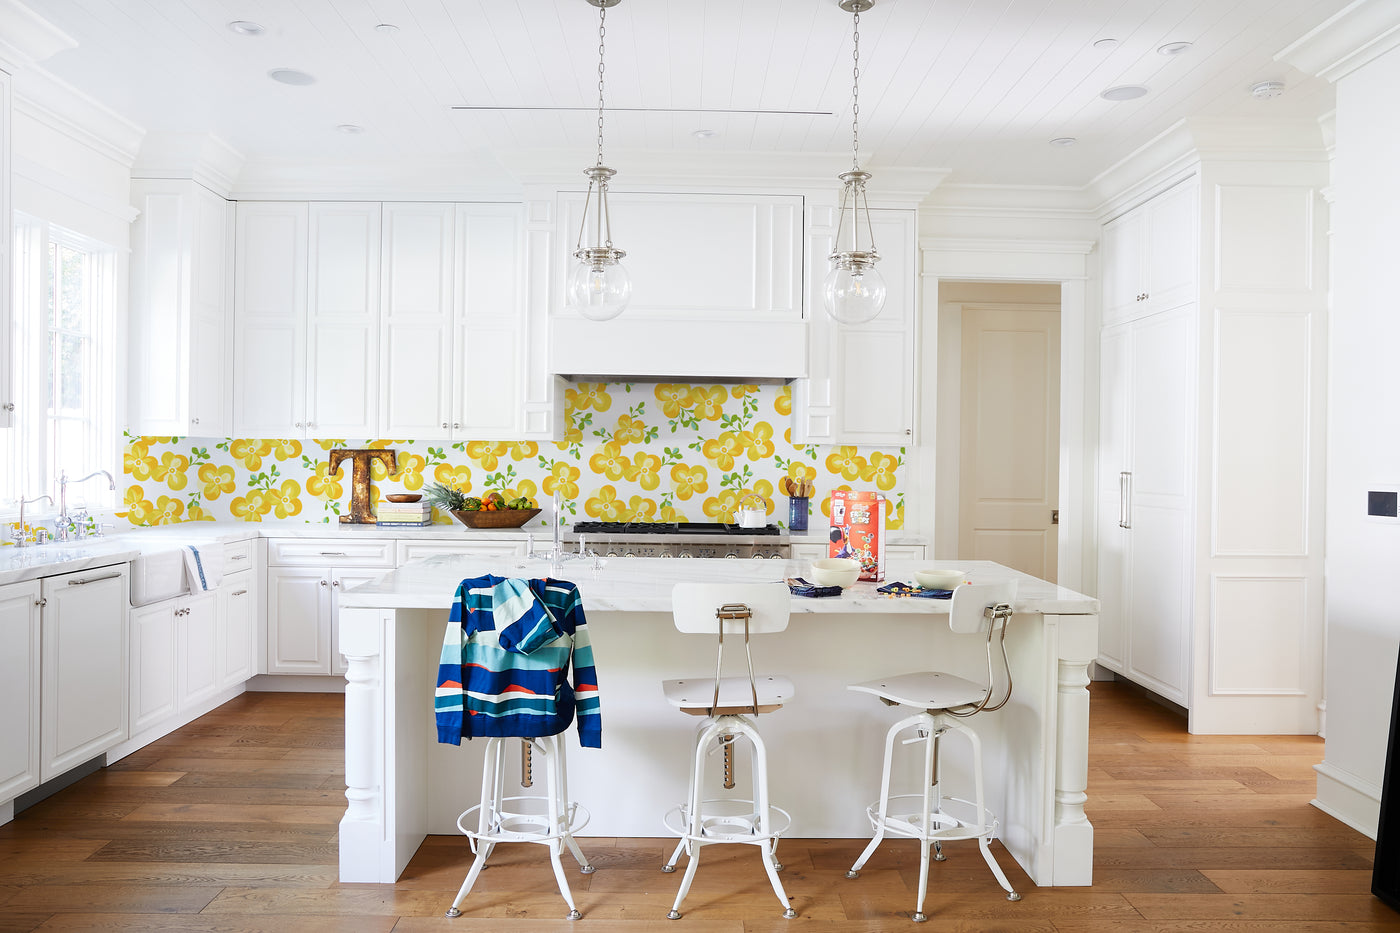 7 Kitchen Decorating Themes & Ideas To Freshen Up For Spring